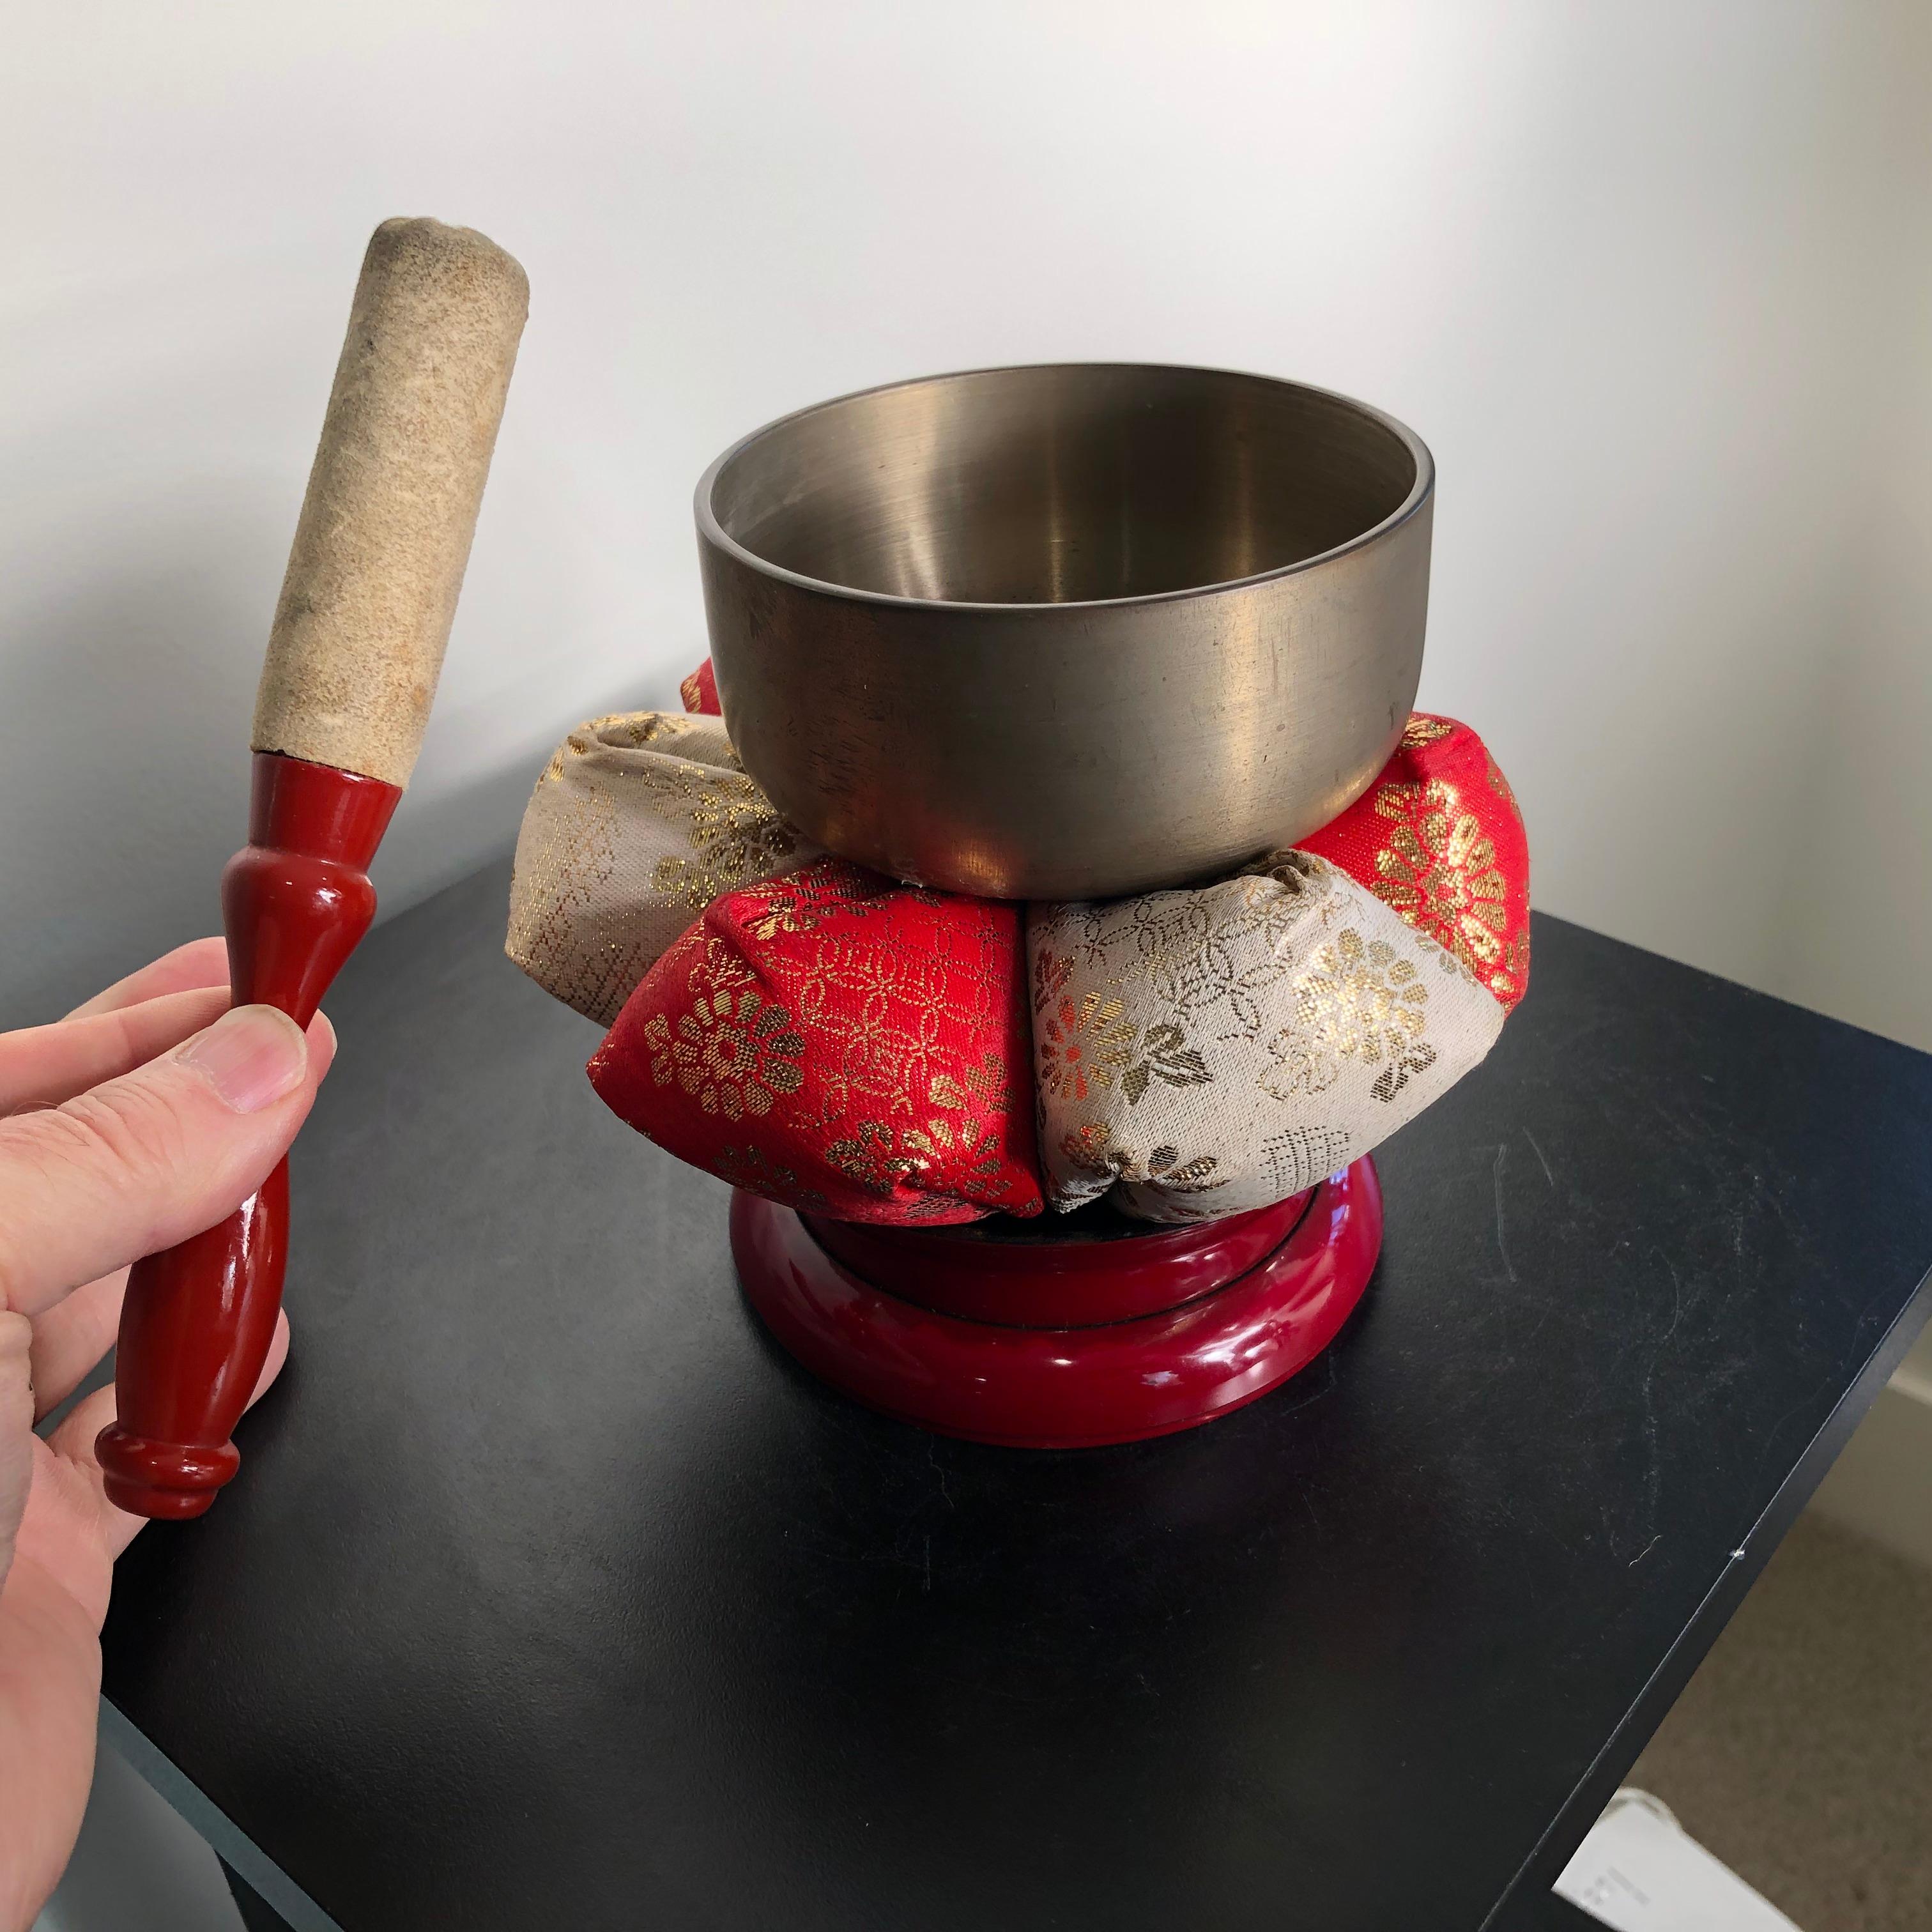 Complete with soothing sound guaranteed to please you

This is a lovely Japanese old complete bronze bell set consisting of four pieces with decorative red lacquer base and flower form pillow plus striker - a complete set.

The bell is